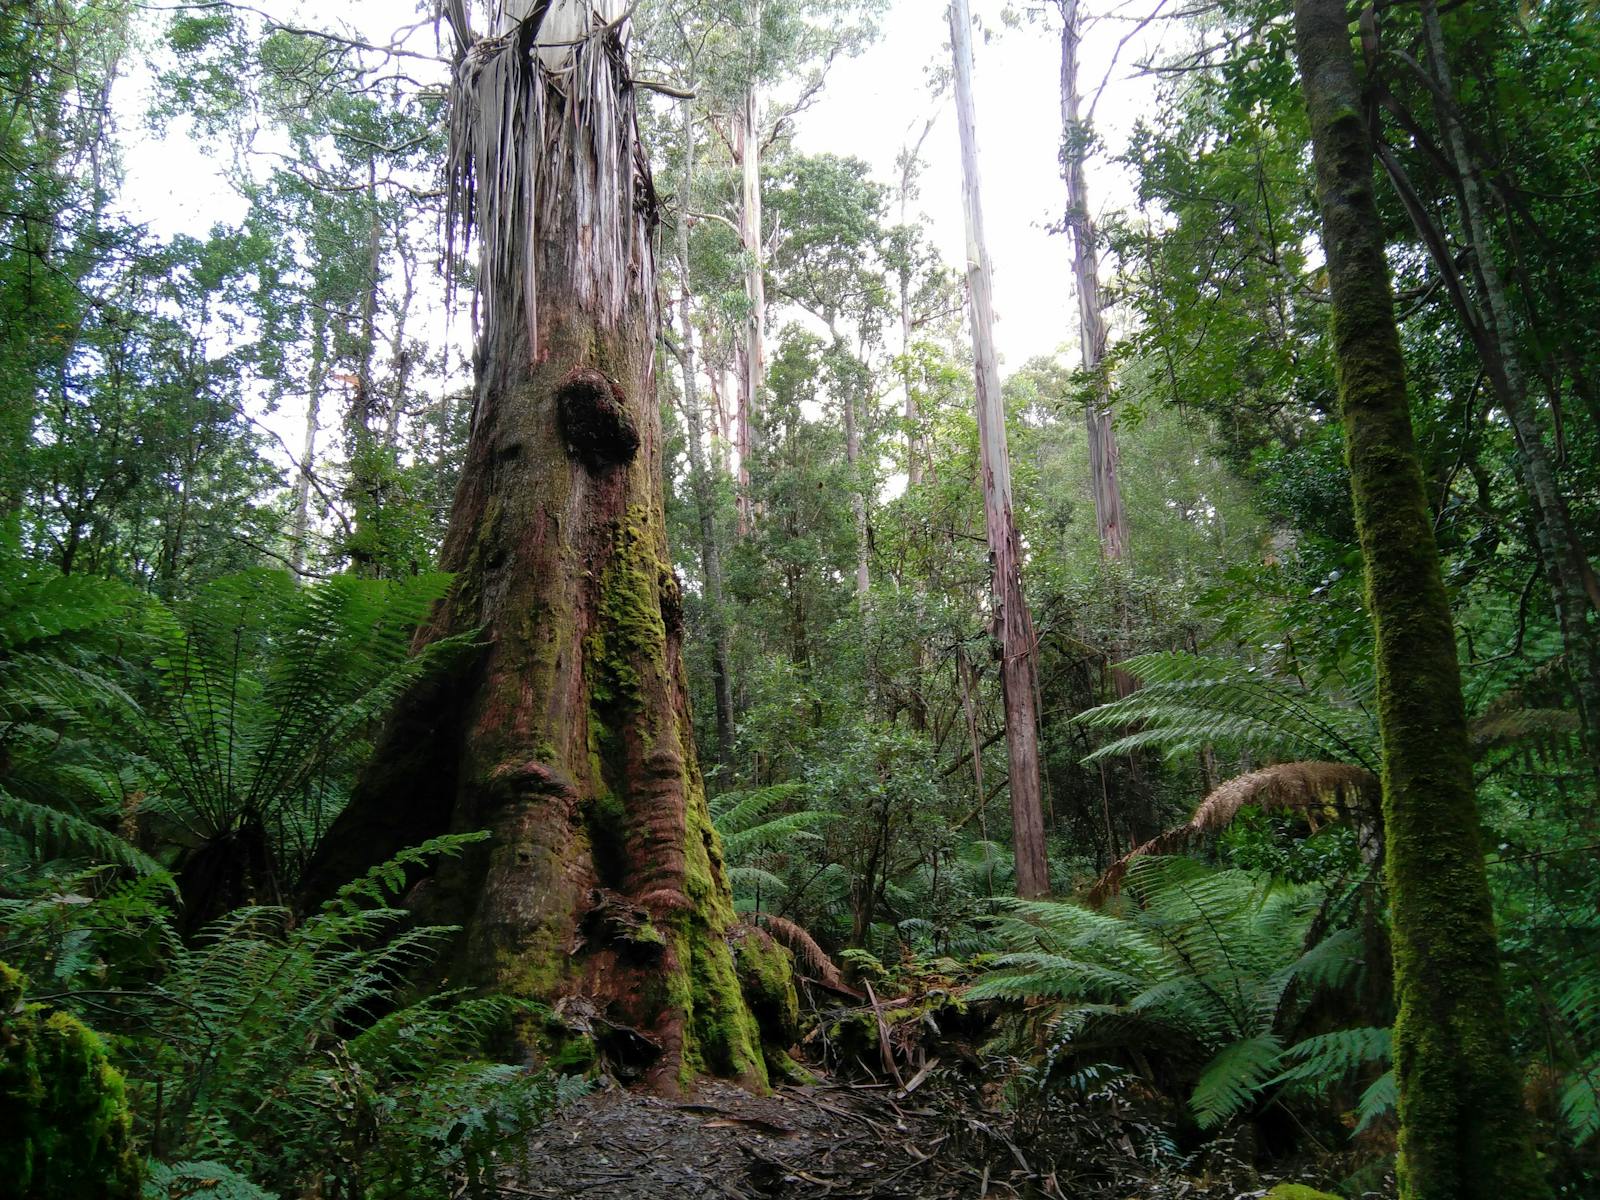 A giant Eucalyptus regnans rises from the rainforest showing distinctive hanging ribbons of bark